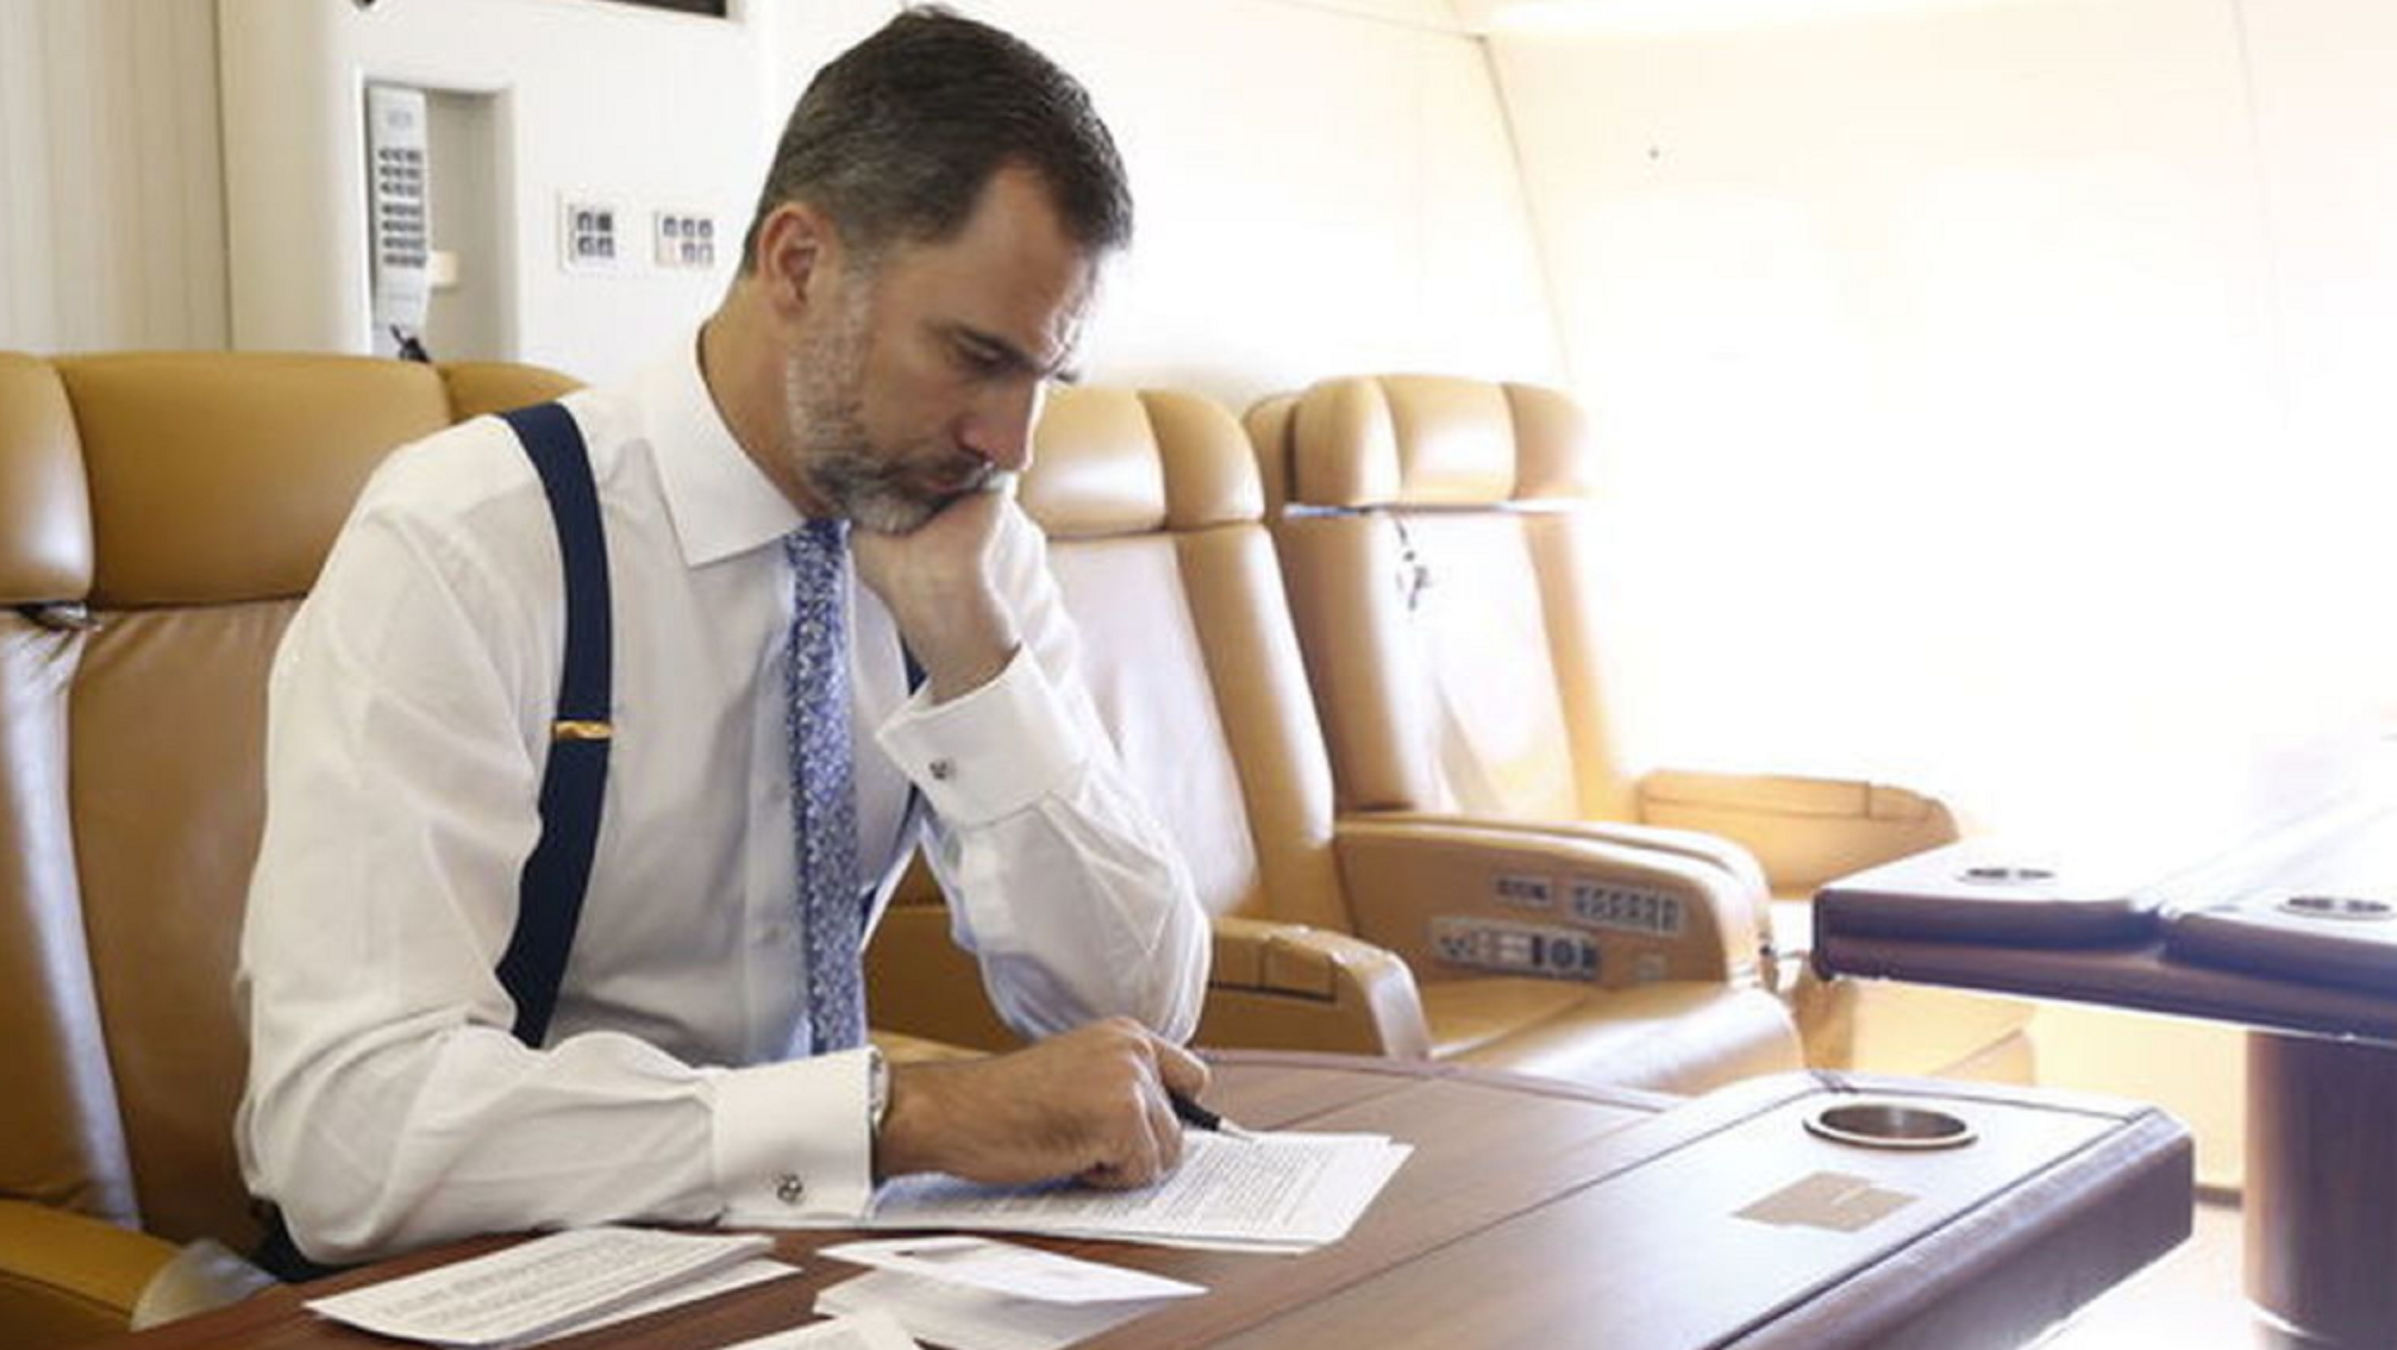 The Spanish royals' luxury holiday starts on their plane